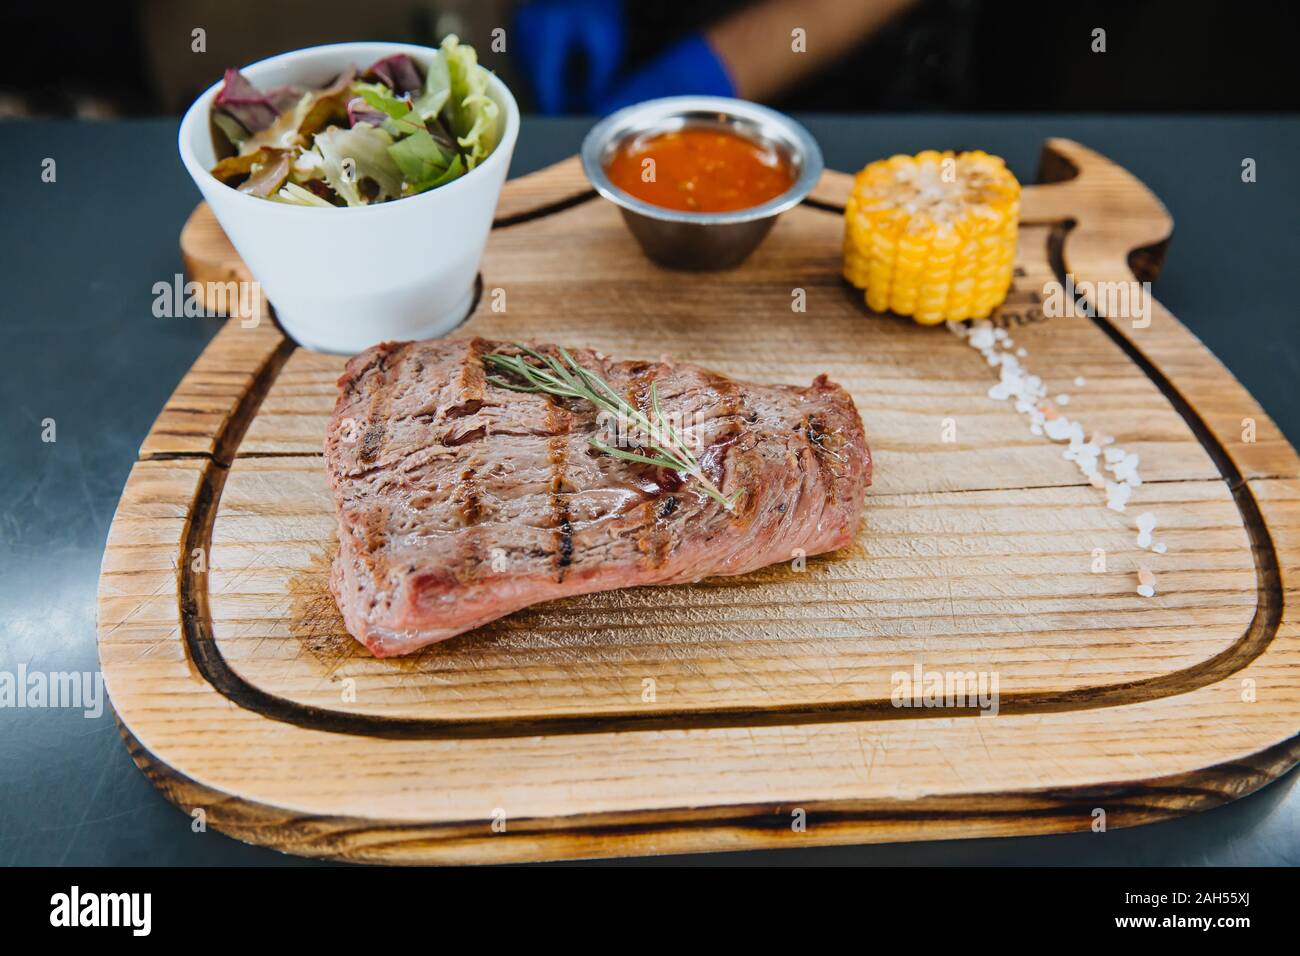 A juicy steak of grilled meat lies with a salad on a wooden Board. Stock Photo